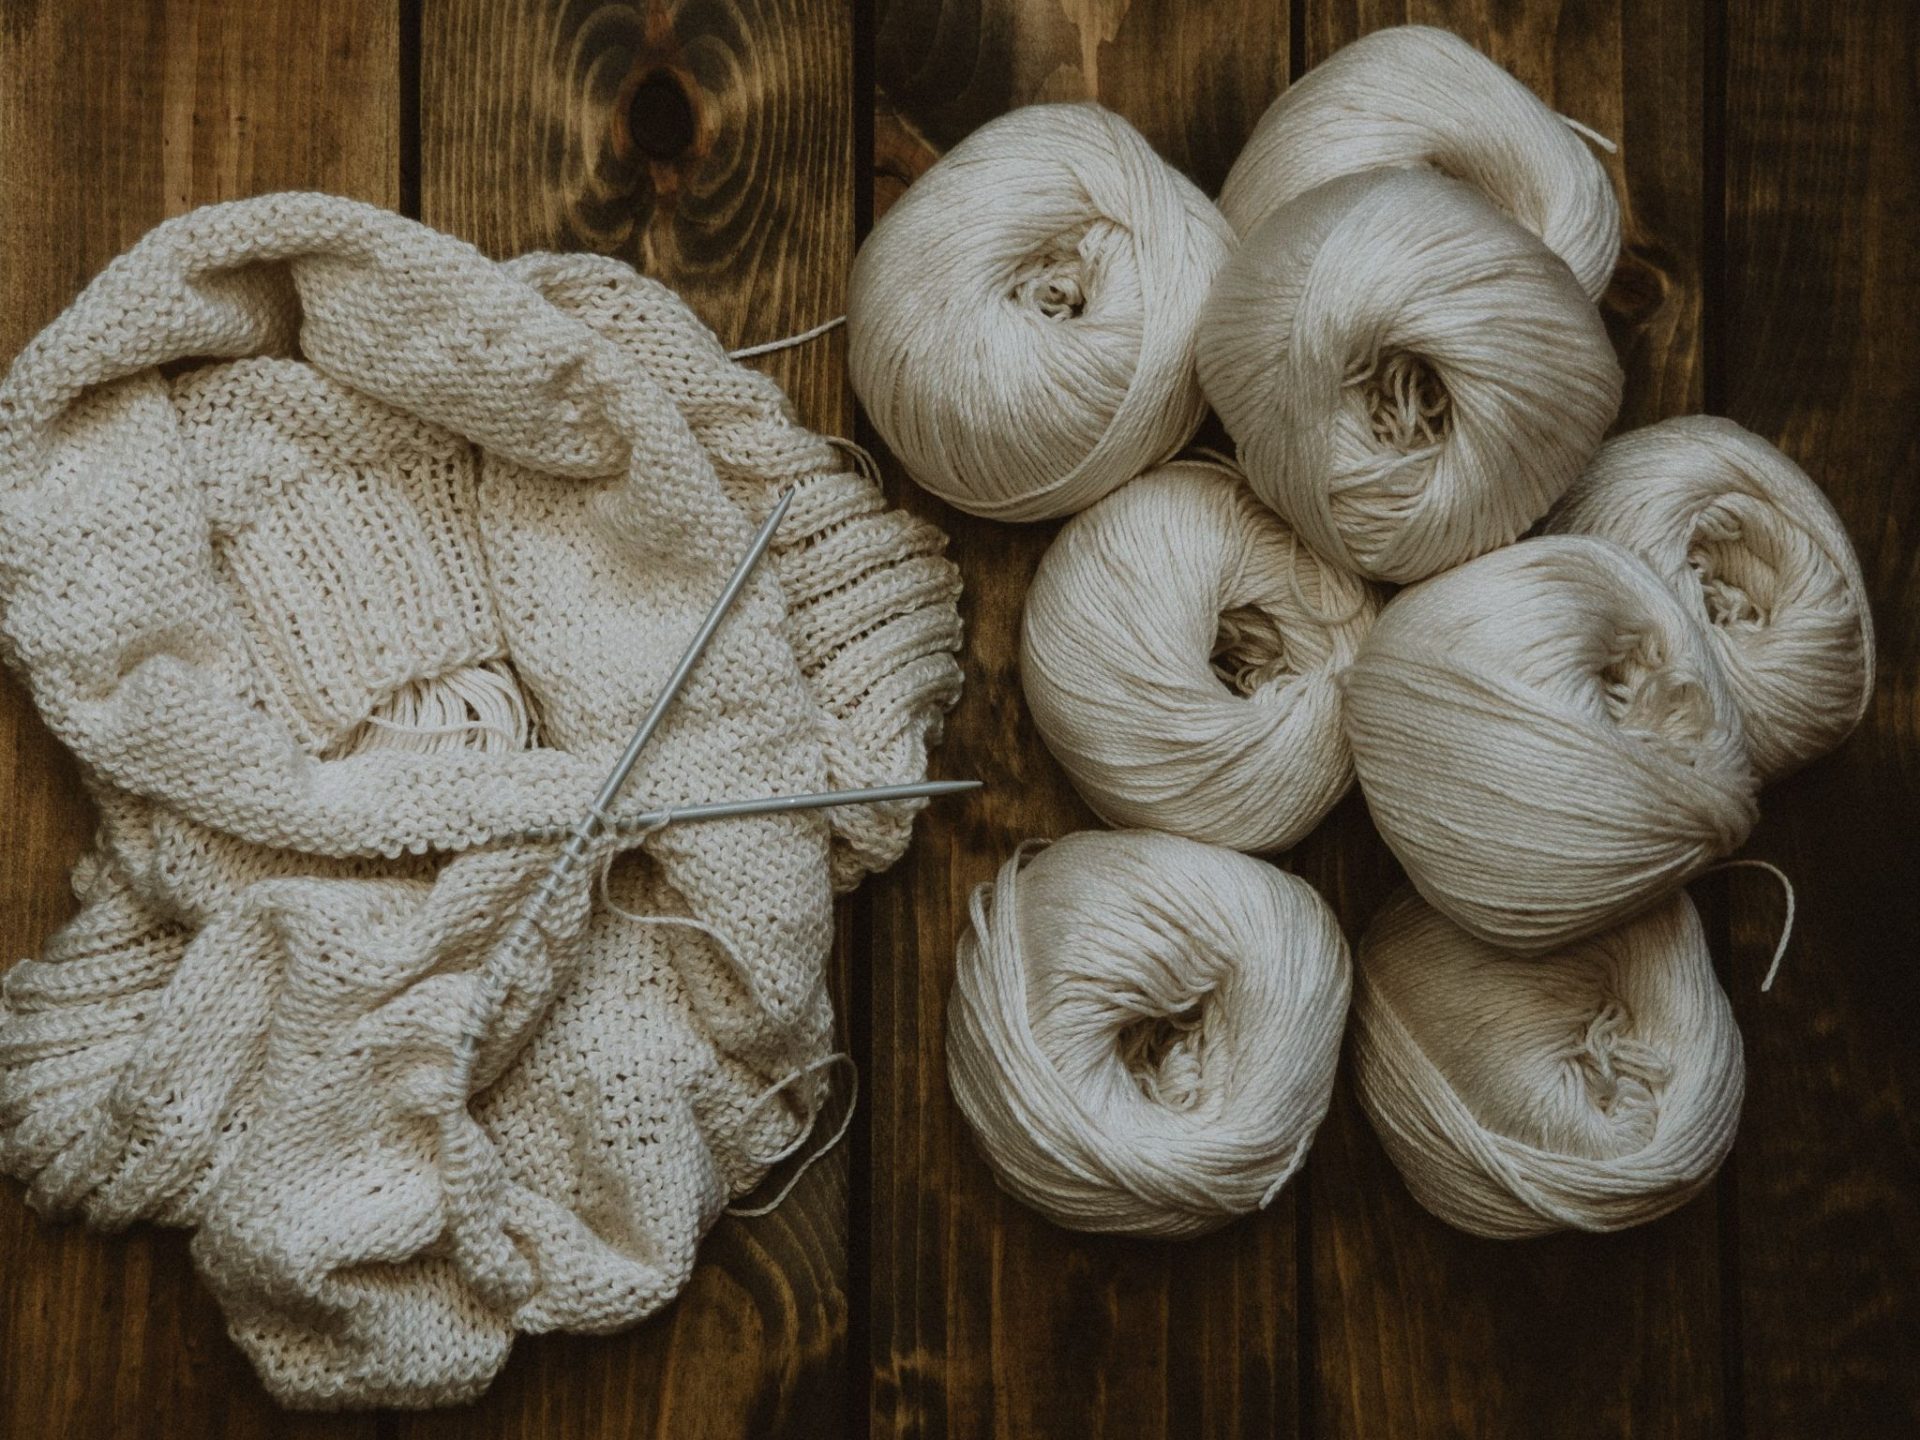 10 Wool Crafts to Try